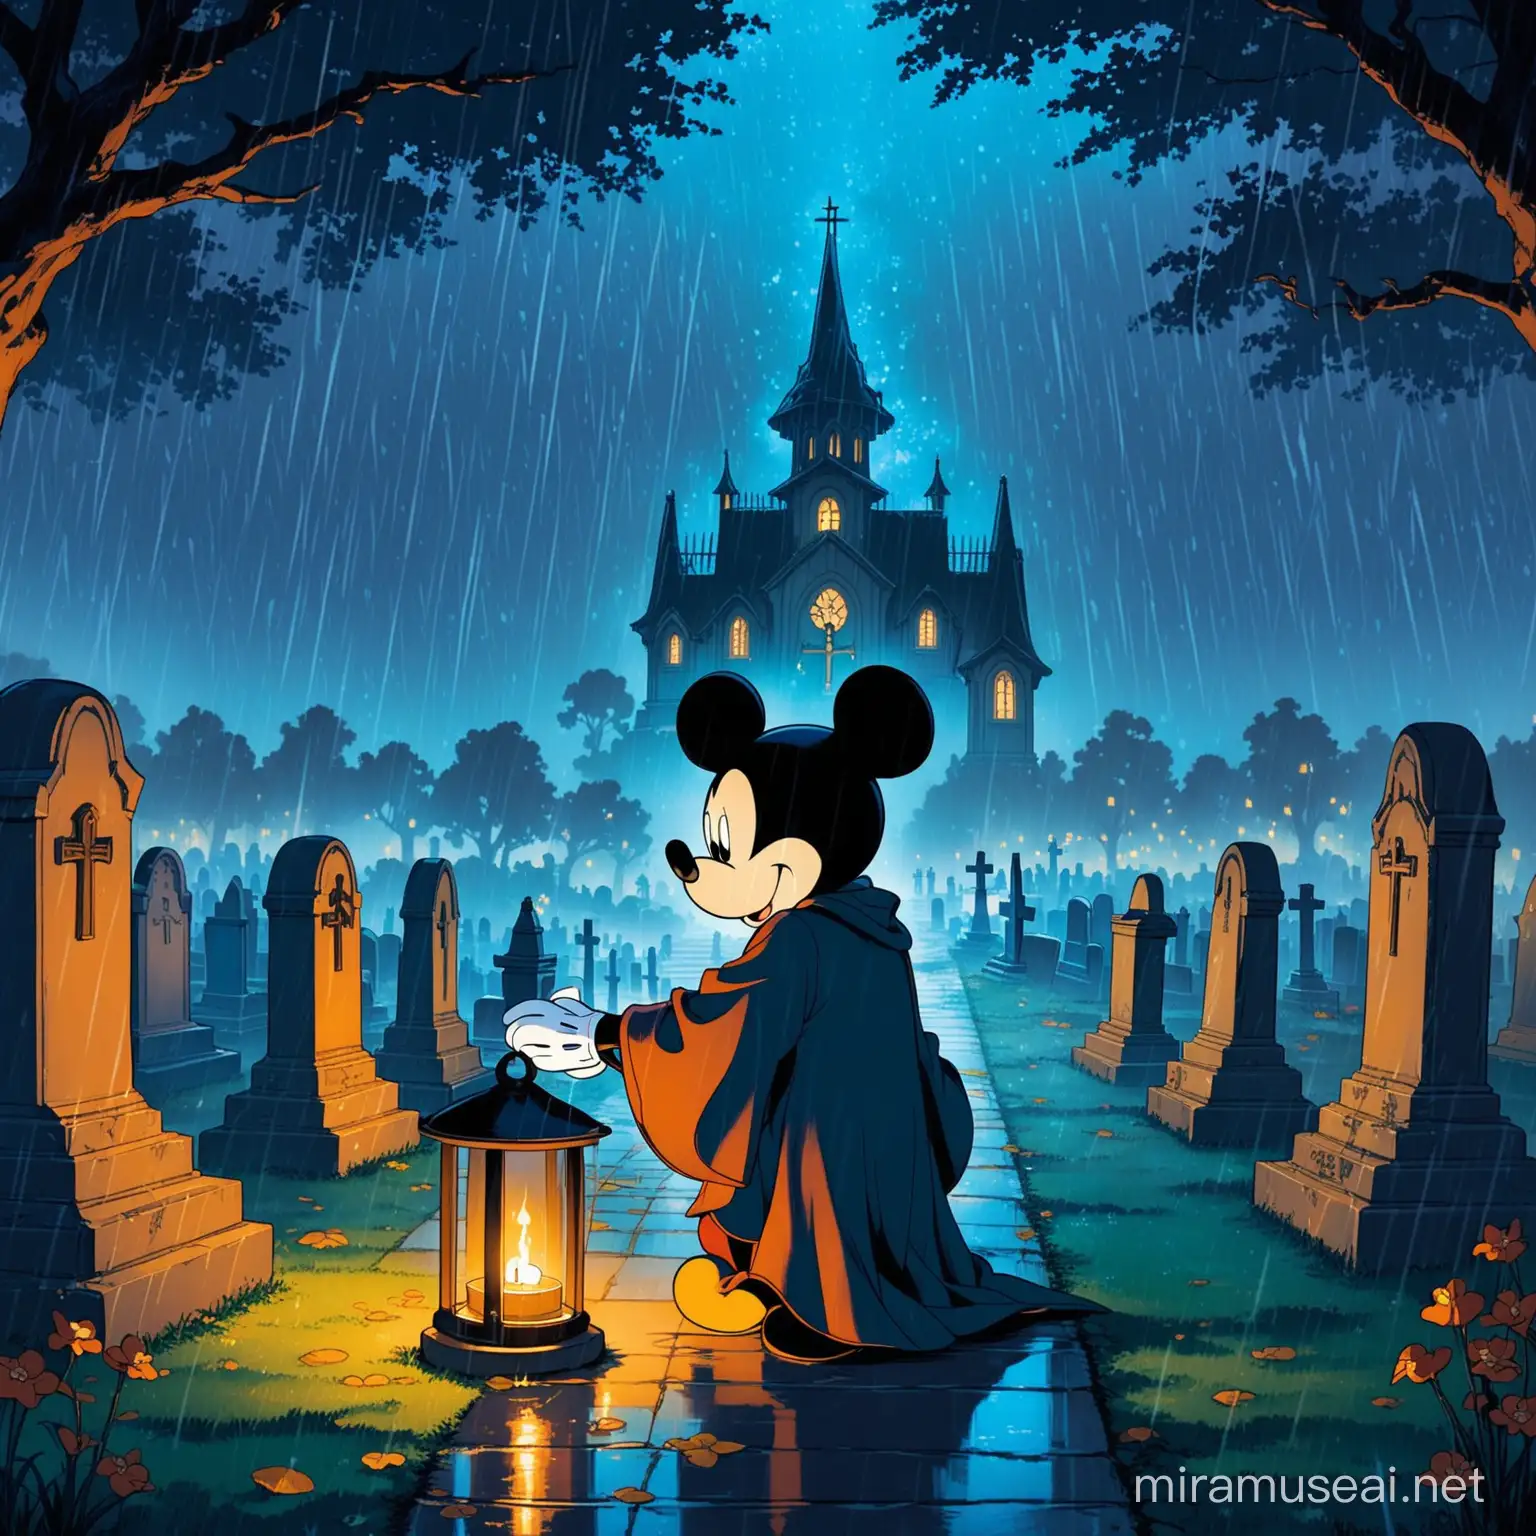 Mickey Mouse as Sorcerers Apprentice Contemplating Life in Rainy Cemetery